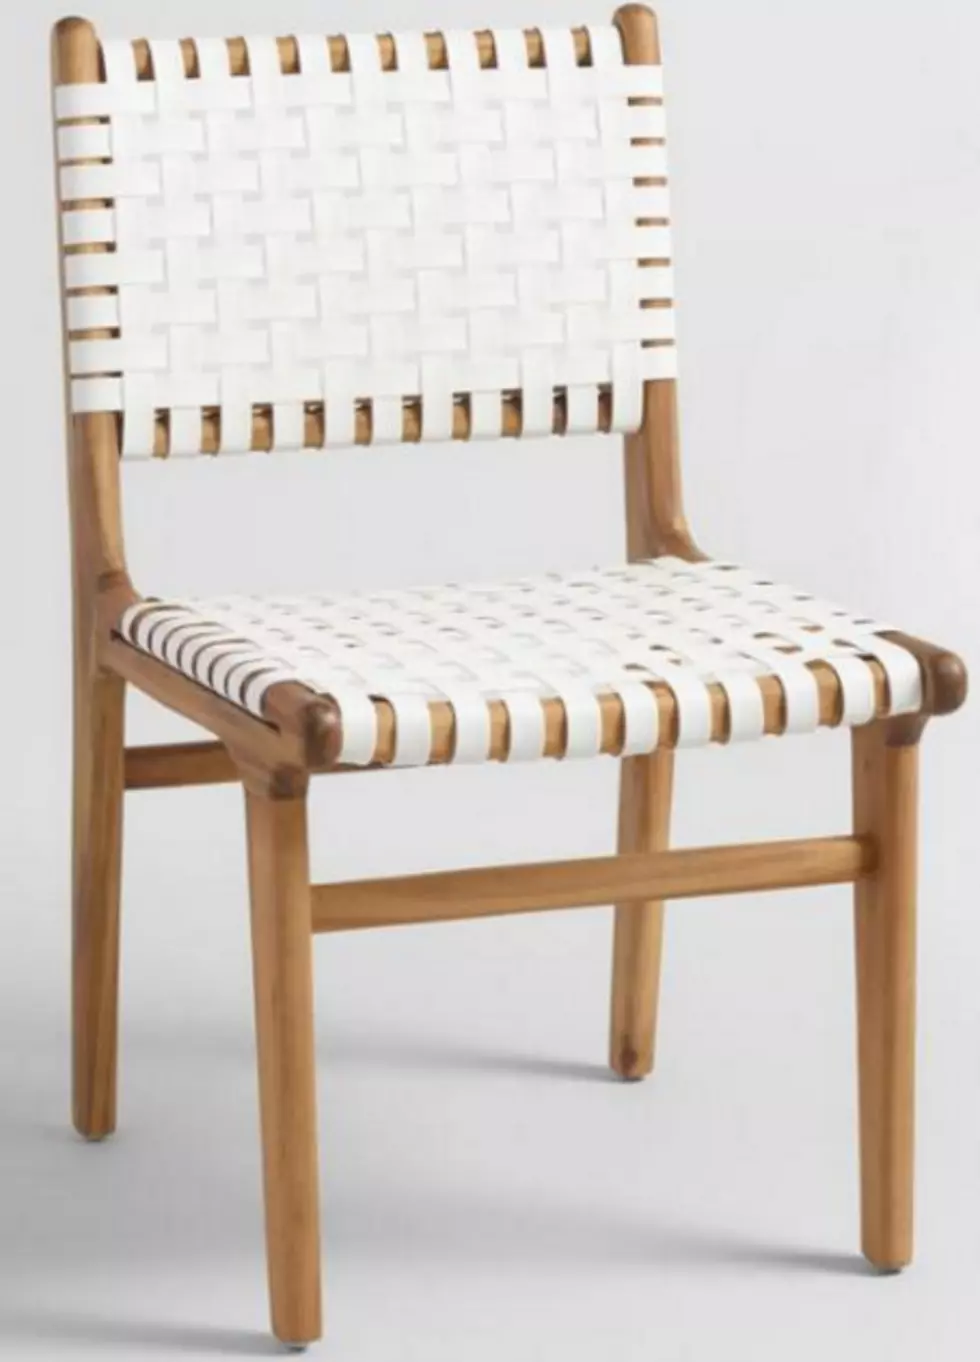 Cost Plus World Market Recalls Girona Outdoor Dining Chairs Due to Fall Hazard